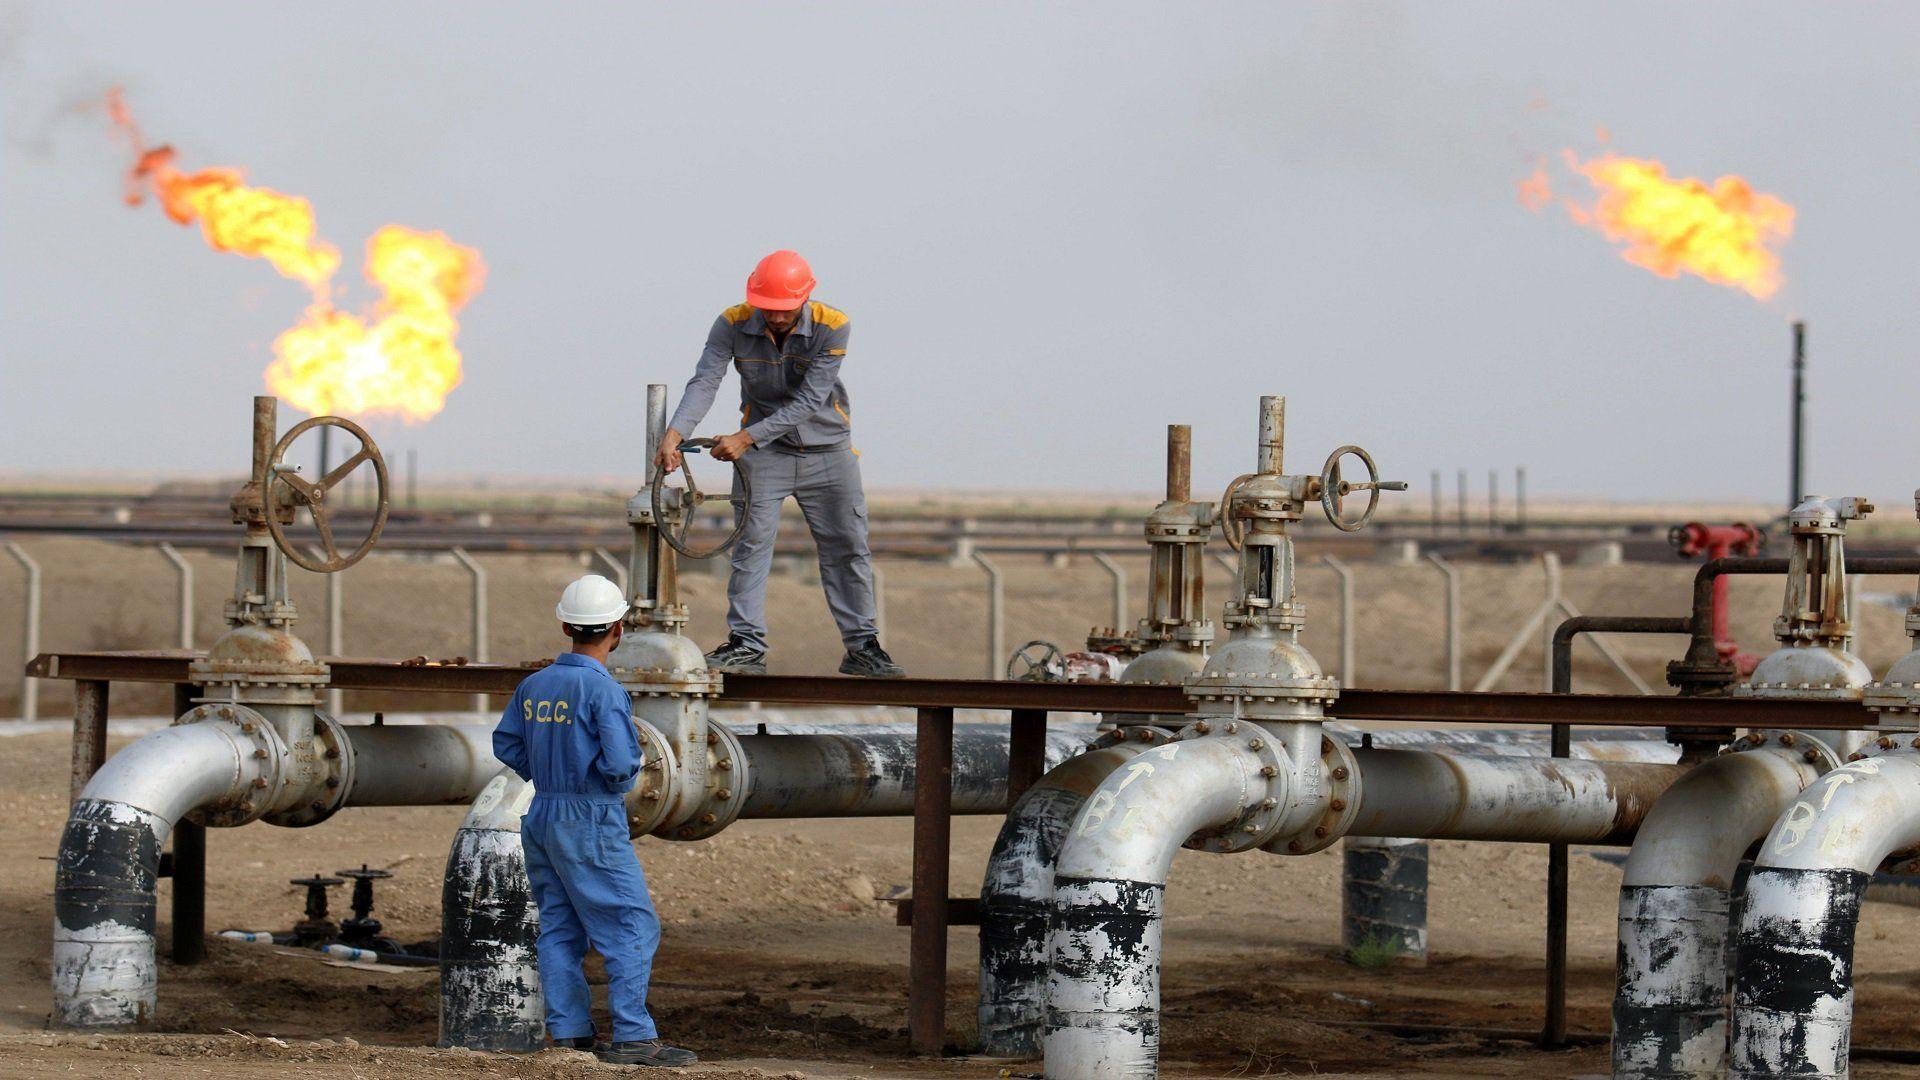 Oil prices hit 13-month highs on tighter supplies, Fed assurance on low rates